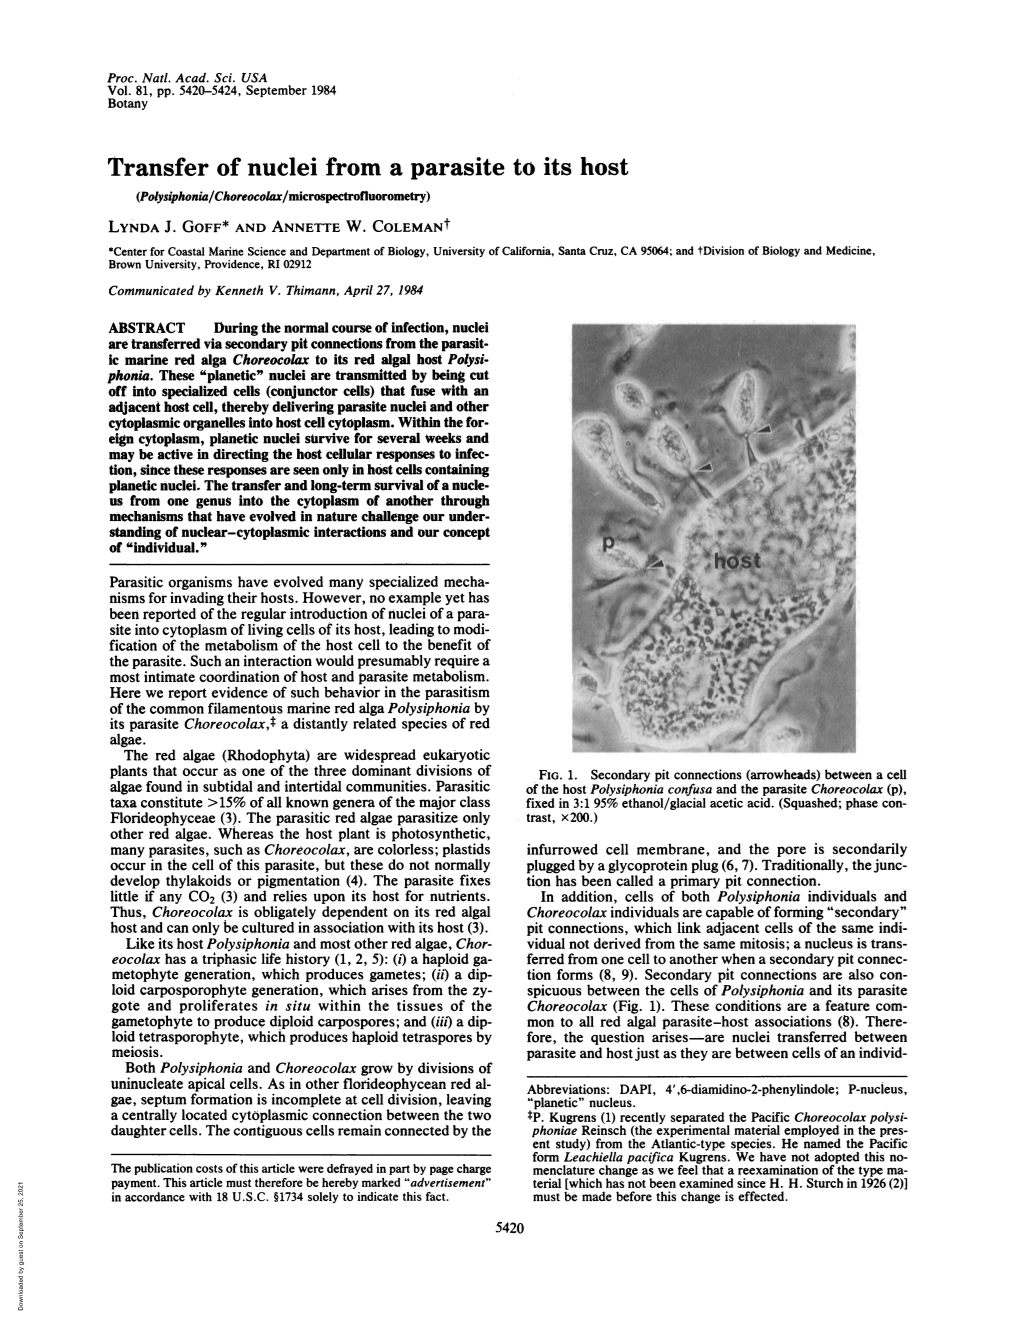 Transfer of Nuclei Froma Parasite to Its Host